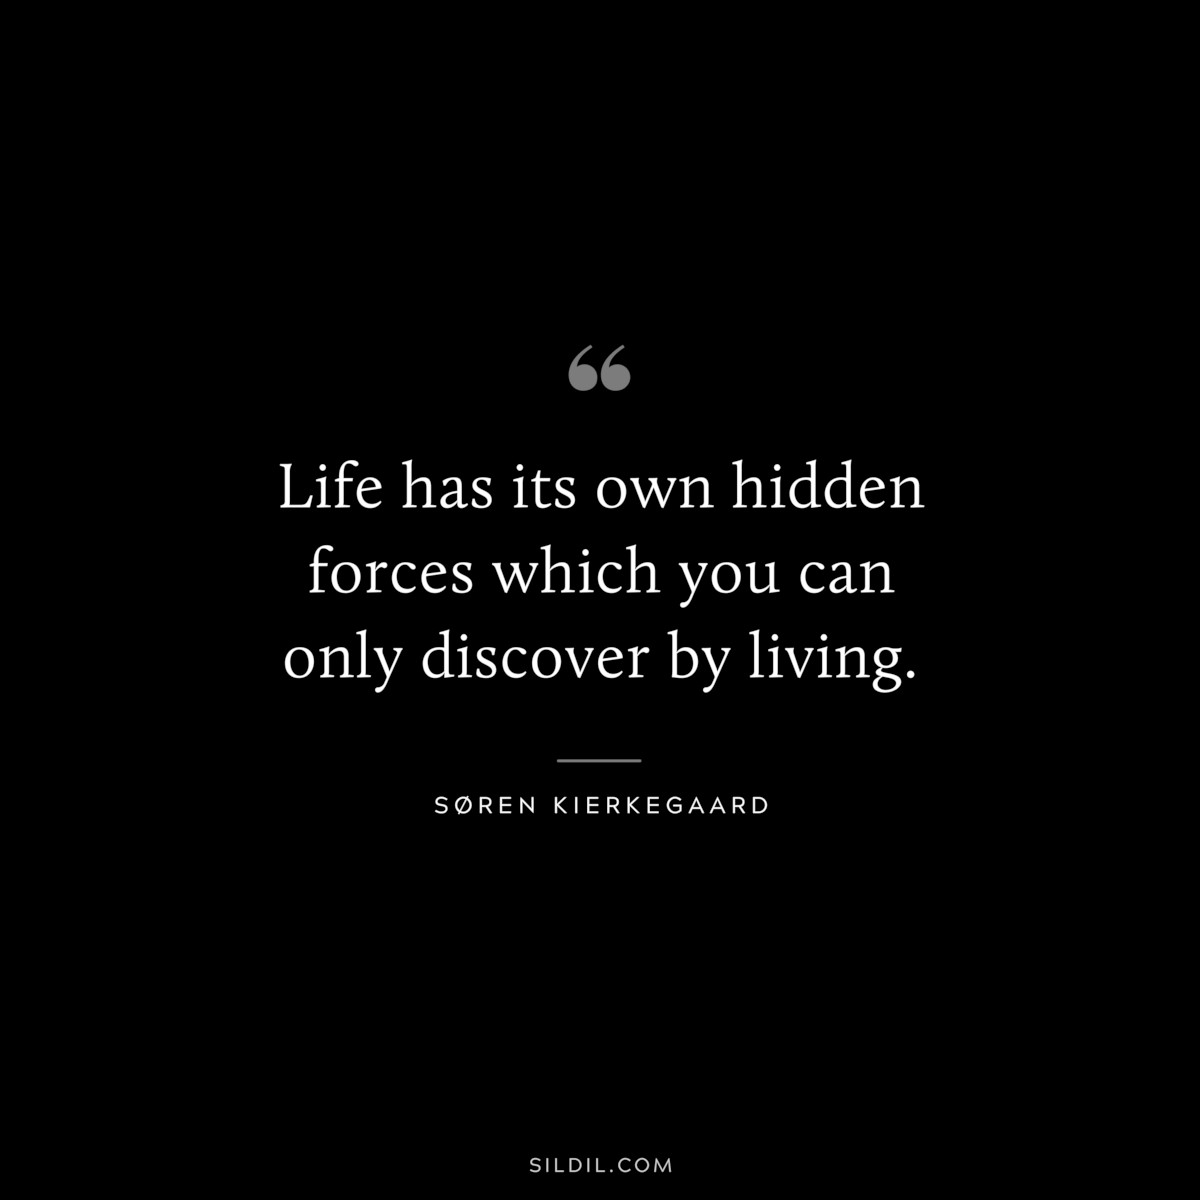 Life has its own hidden forces which you can only discover by living. ― Søren Kierkegaard